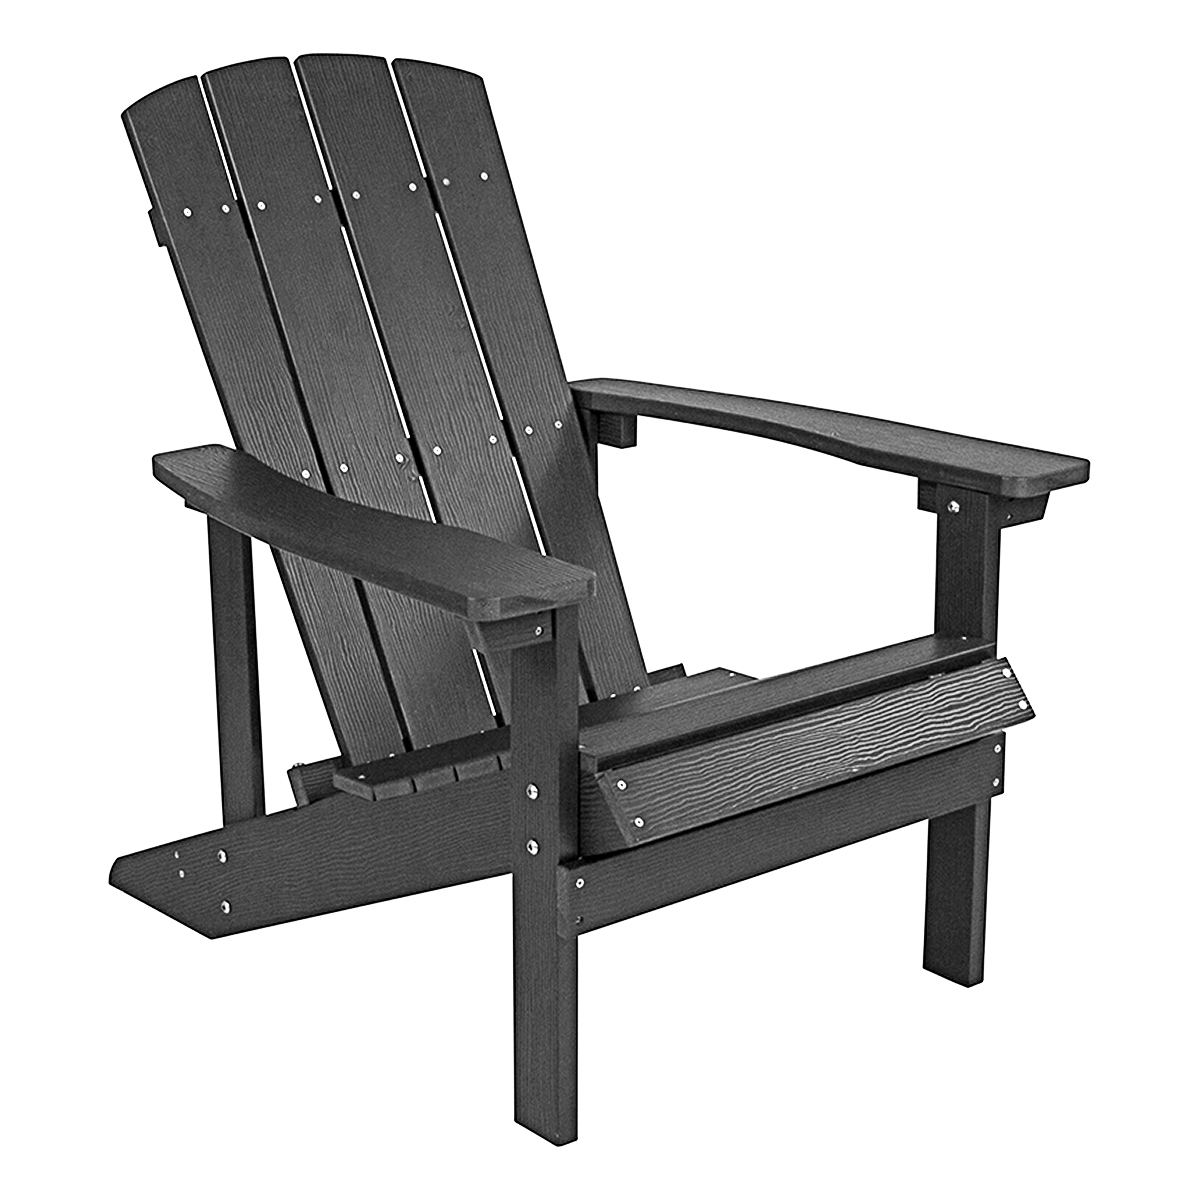 All-Weather Composite Wood Adirondack Chair, Poly-Resin, 7 